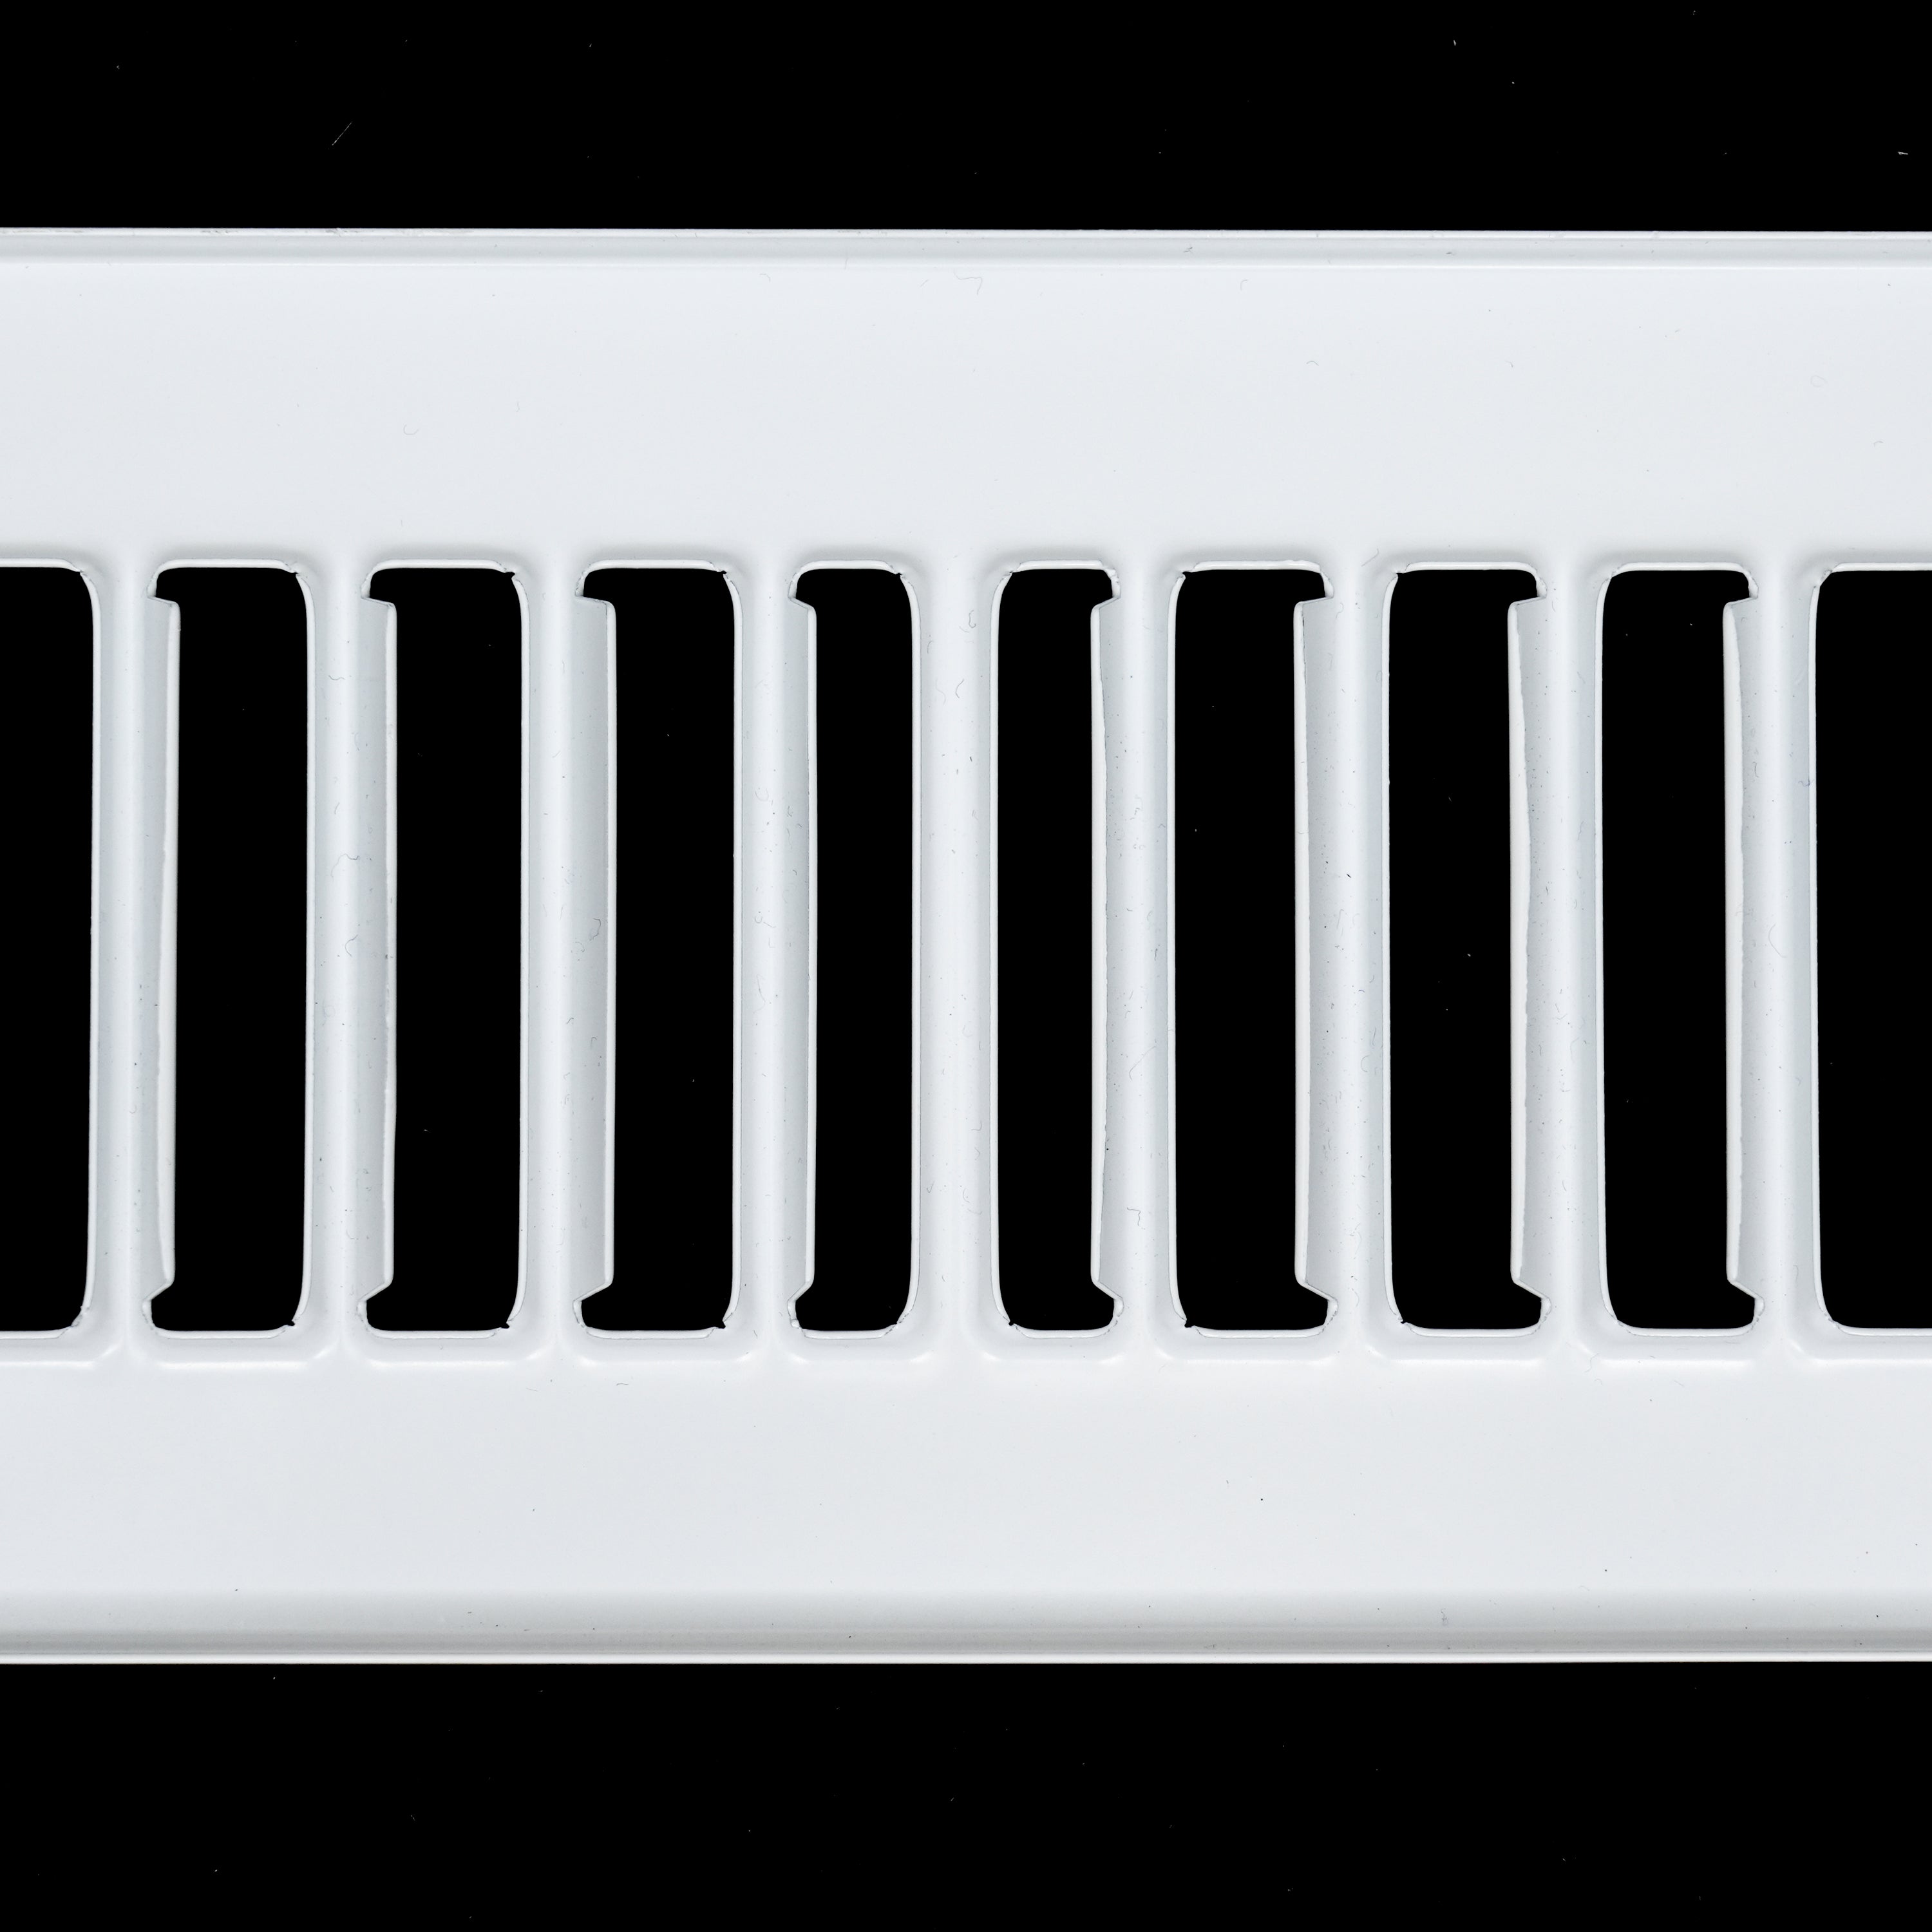 2" x 10" [Duct Opening Size] Toe Kick Register Grille | Vent Cover  | Outer Dimensions: 3.5" X 11.5" | White